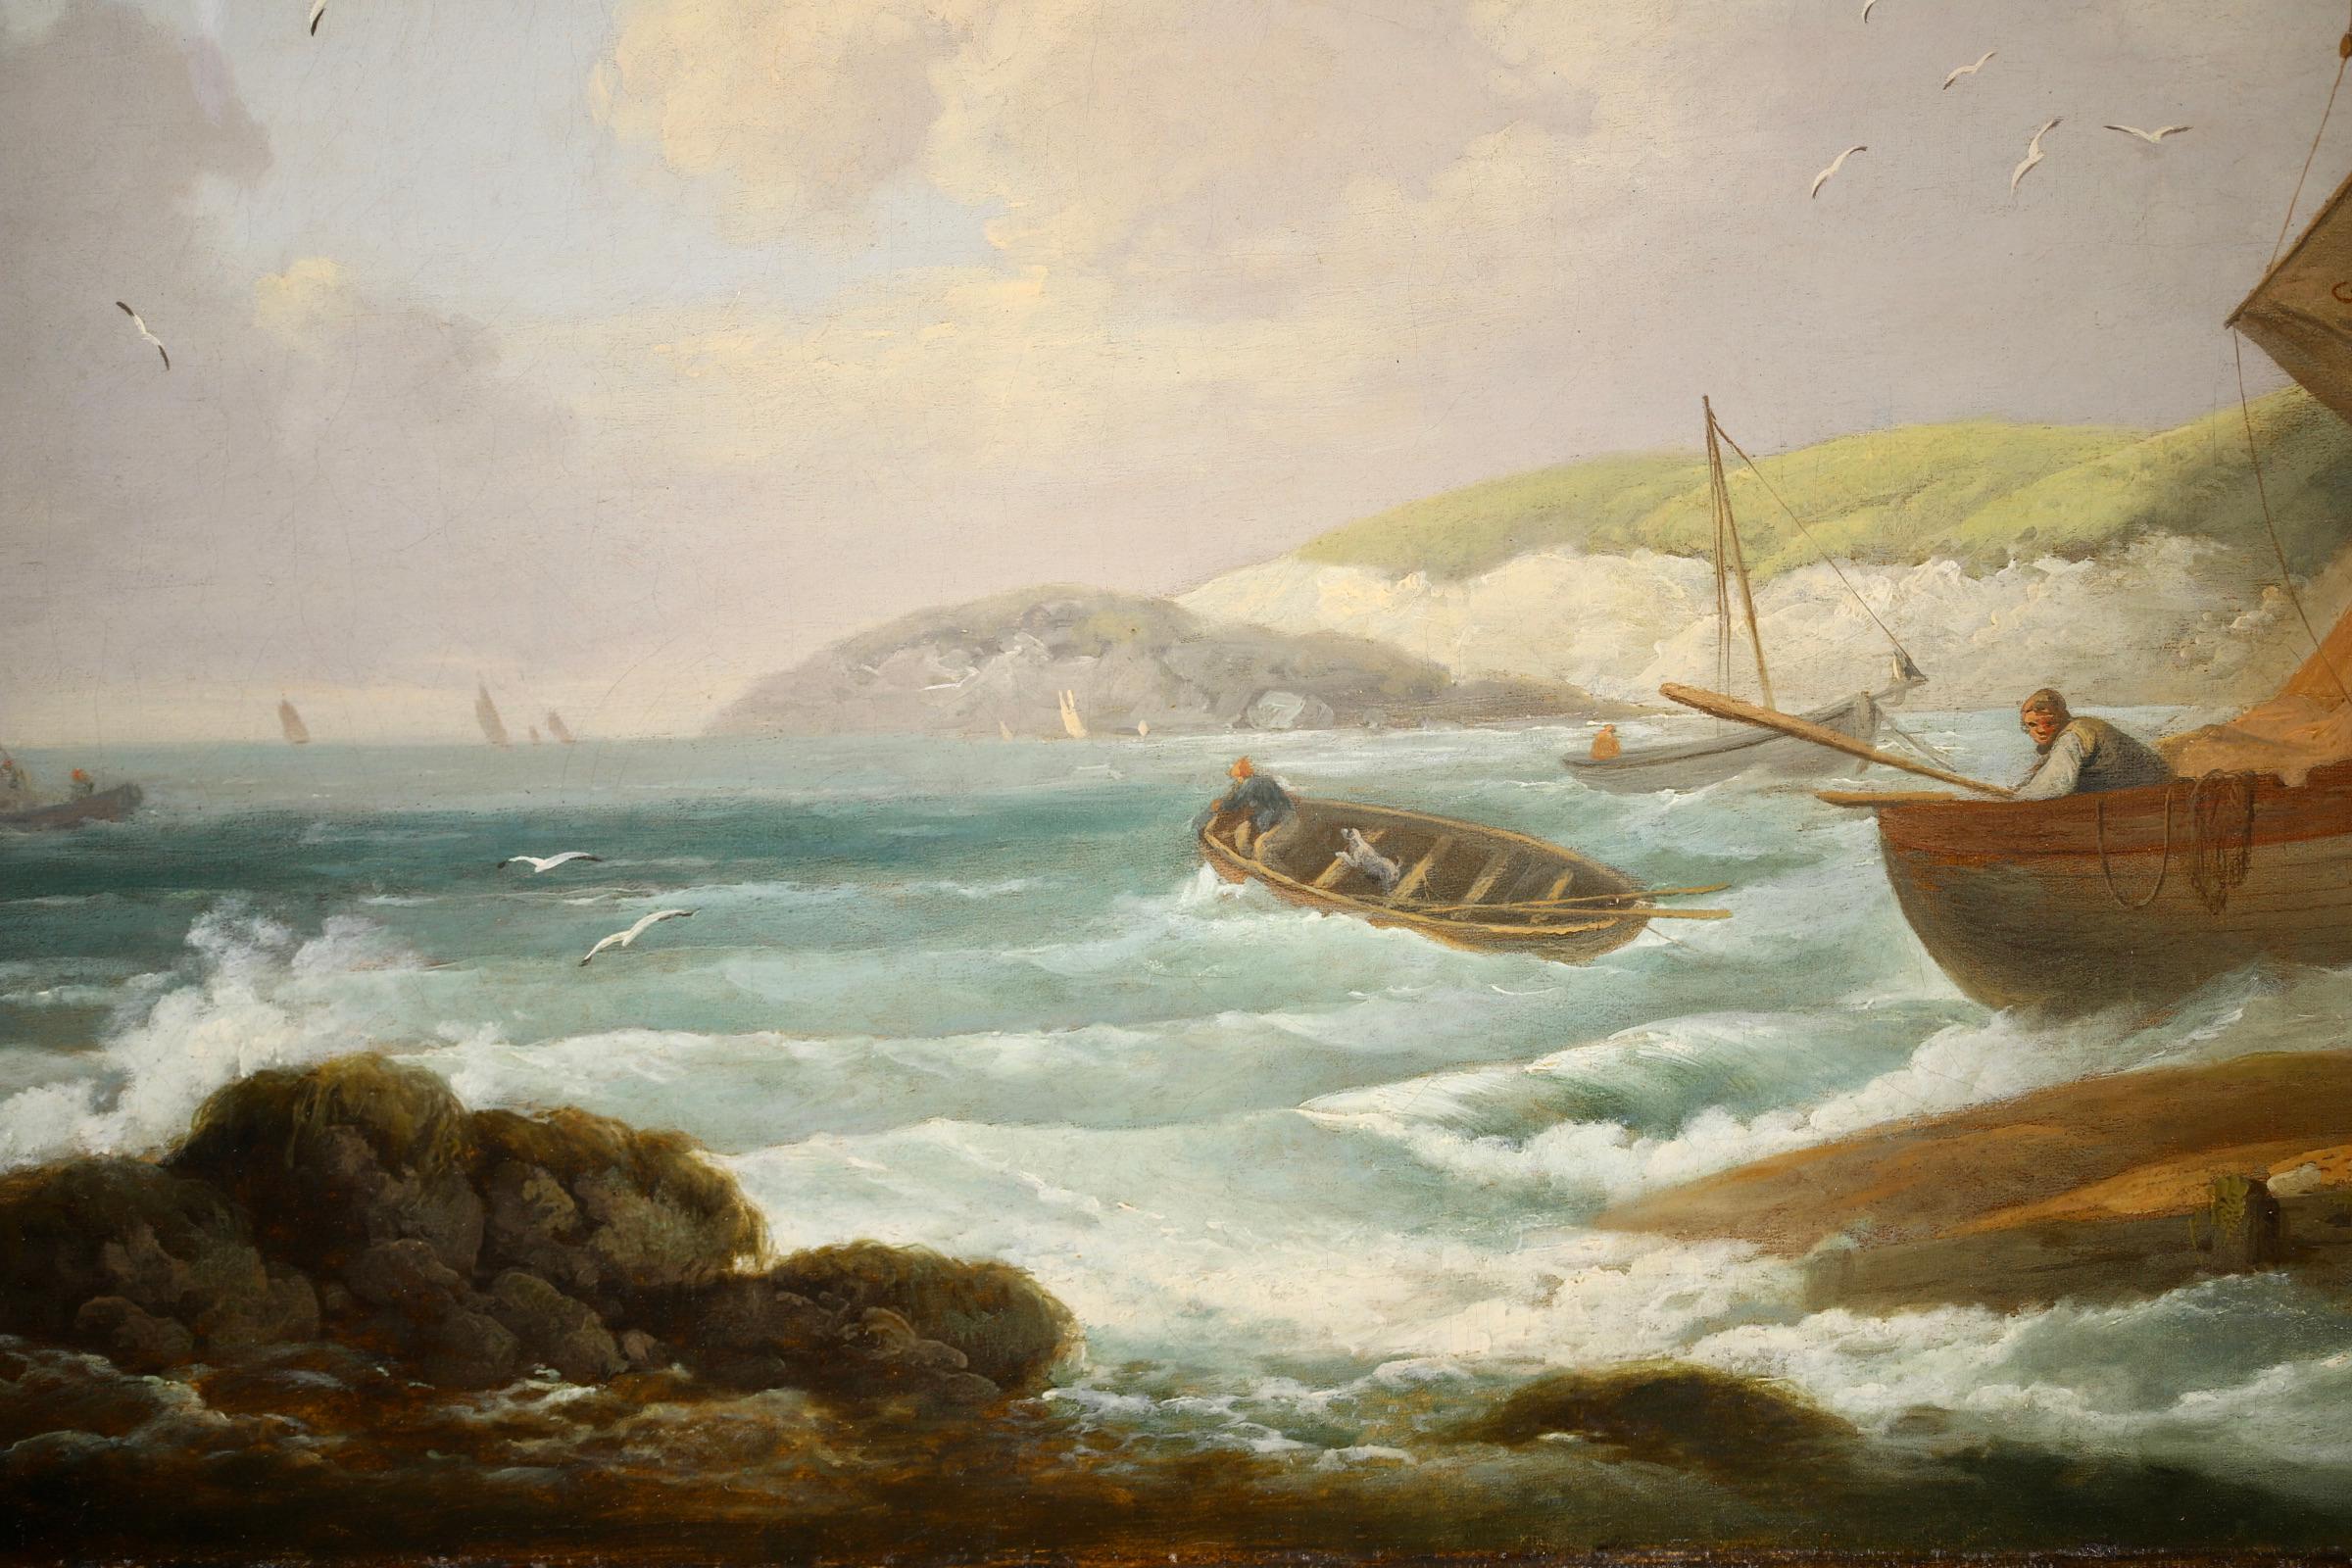 A beautiful original oil on canvas by George Morland R.A. the important english landscape and figure painter who worked din the 18th century. This large canvas depicts boats heading out to sea from the Isle of Wight. The painting has great